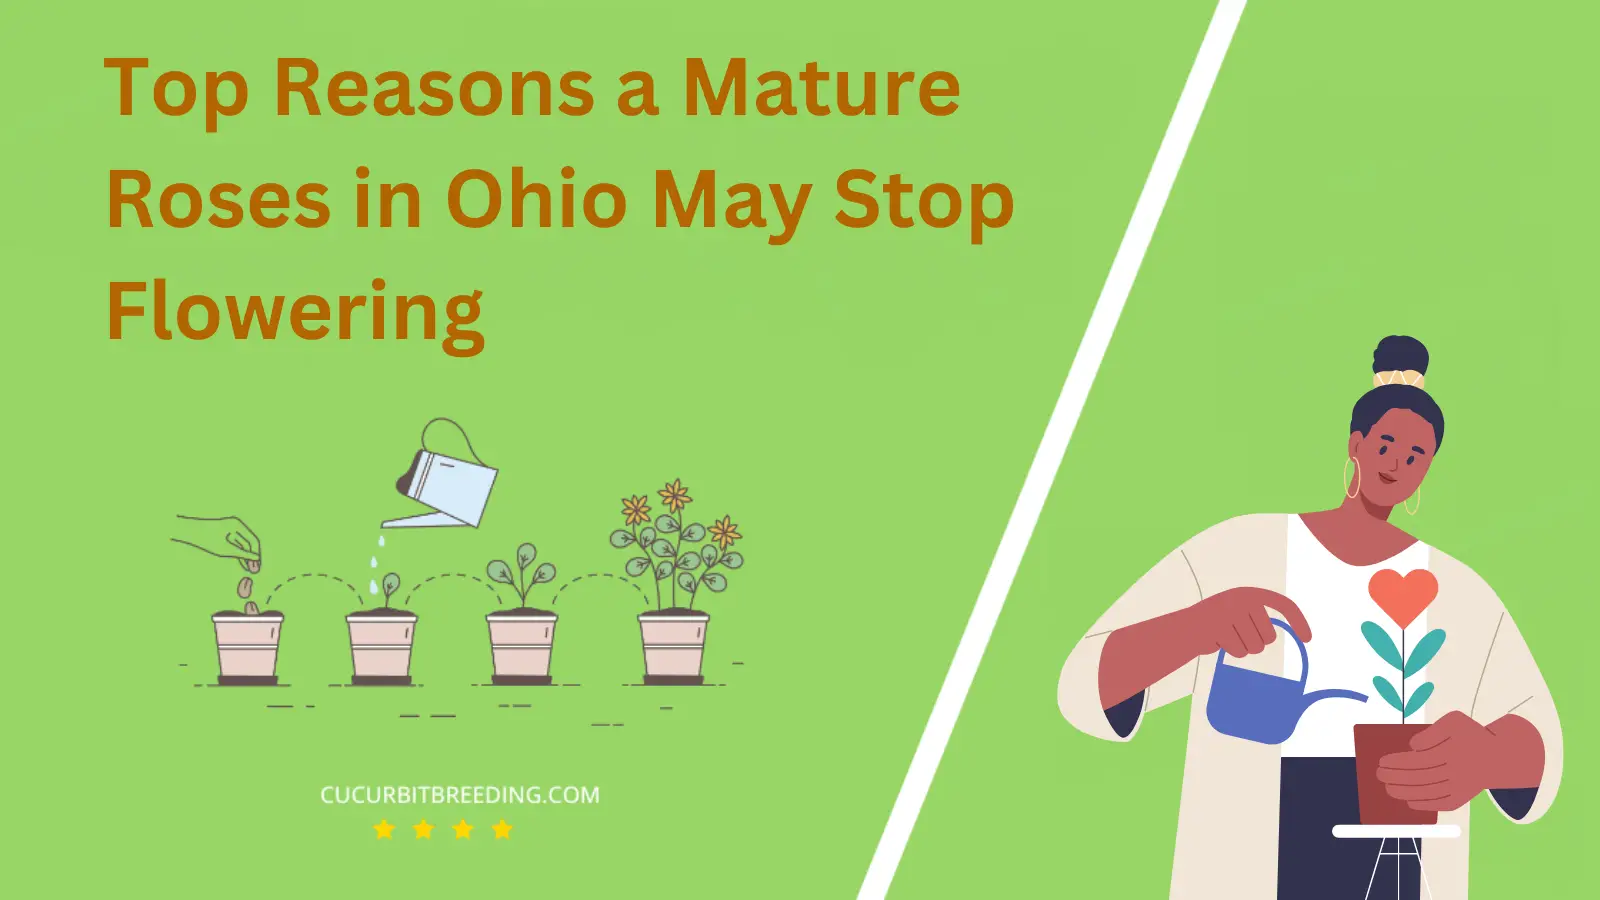 Top Reasons a Mature Roses in Ohio May Stop Flowering